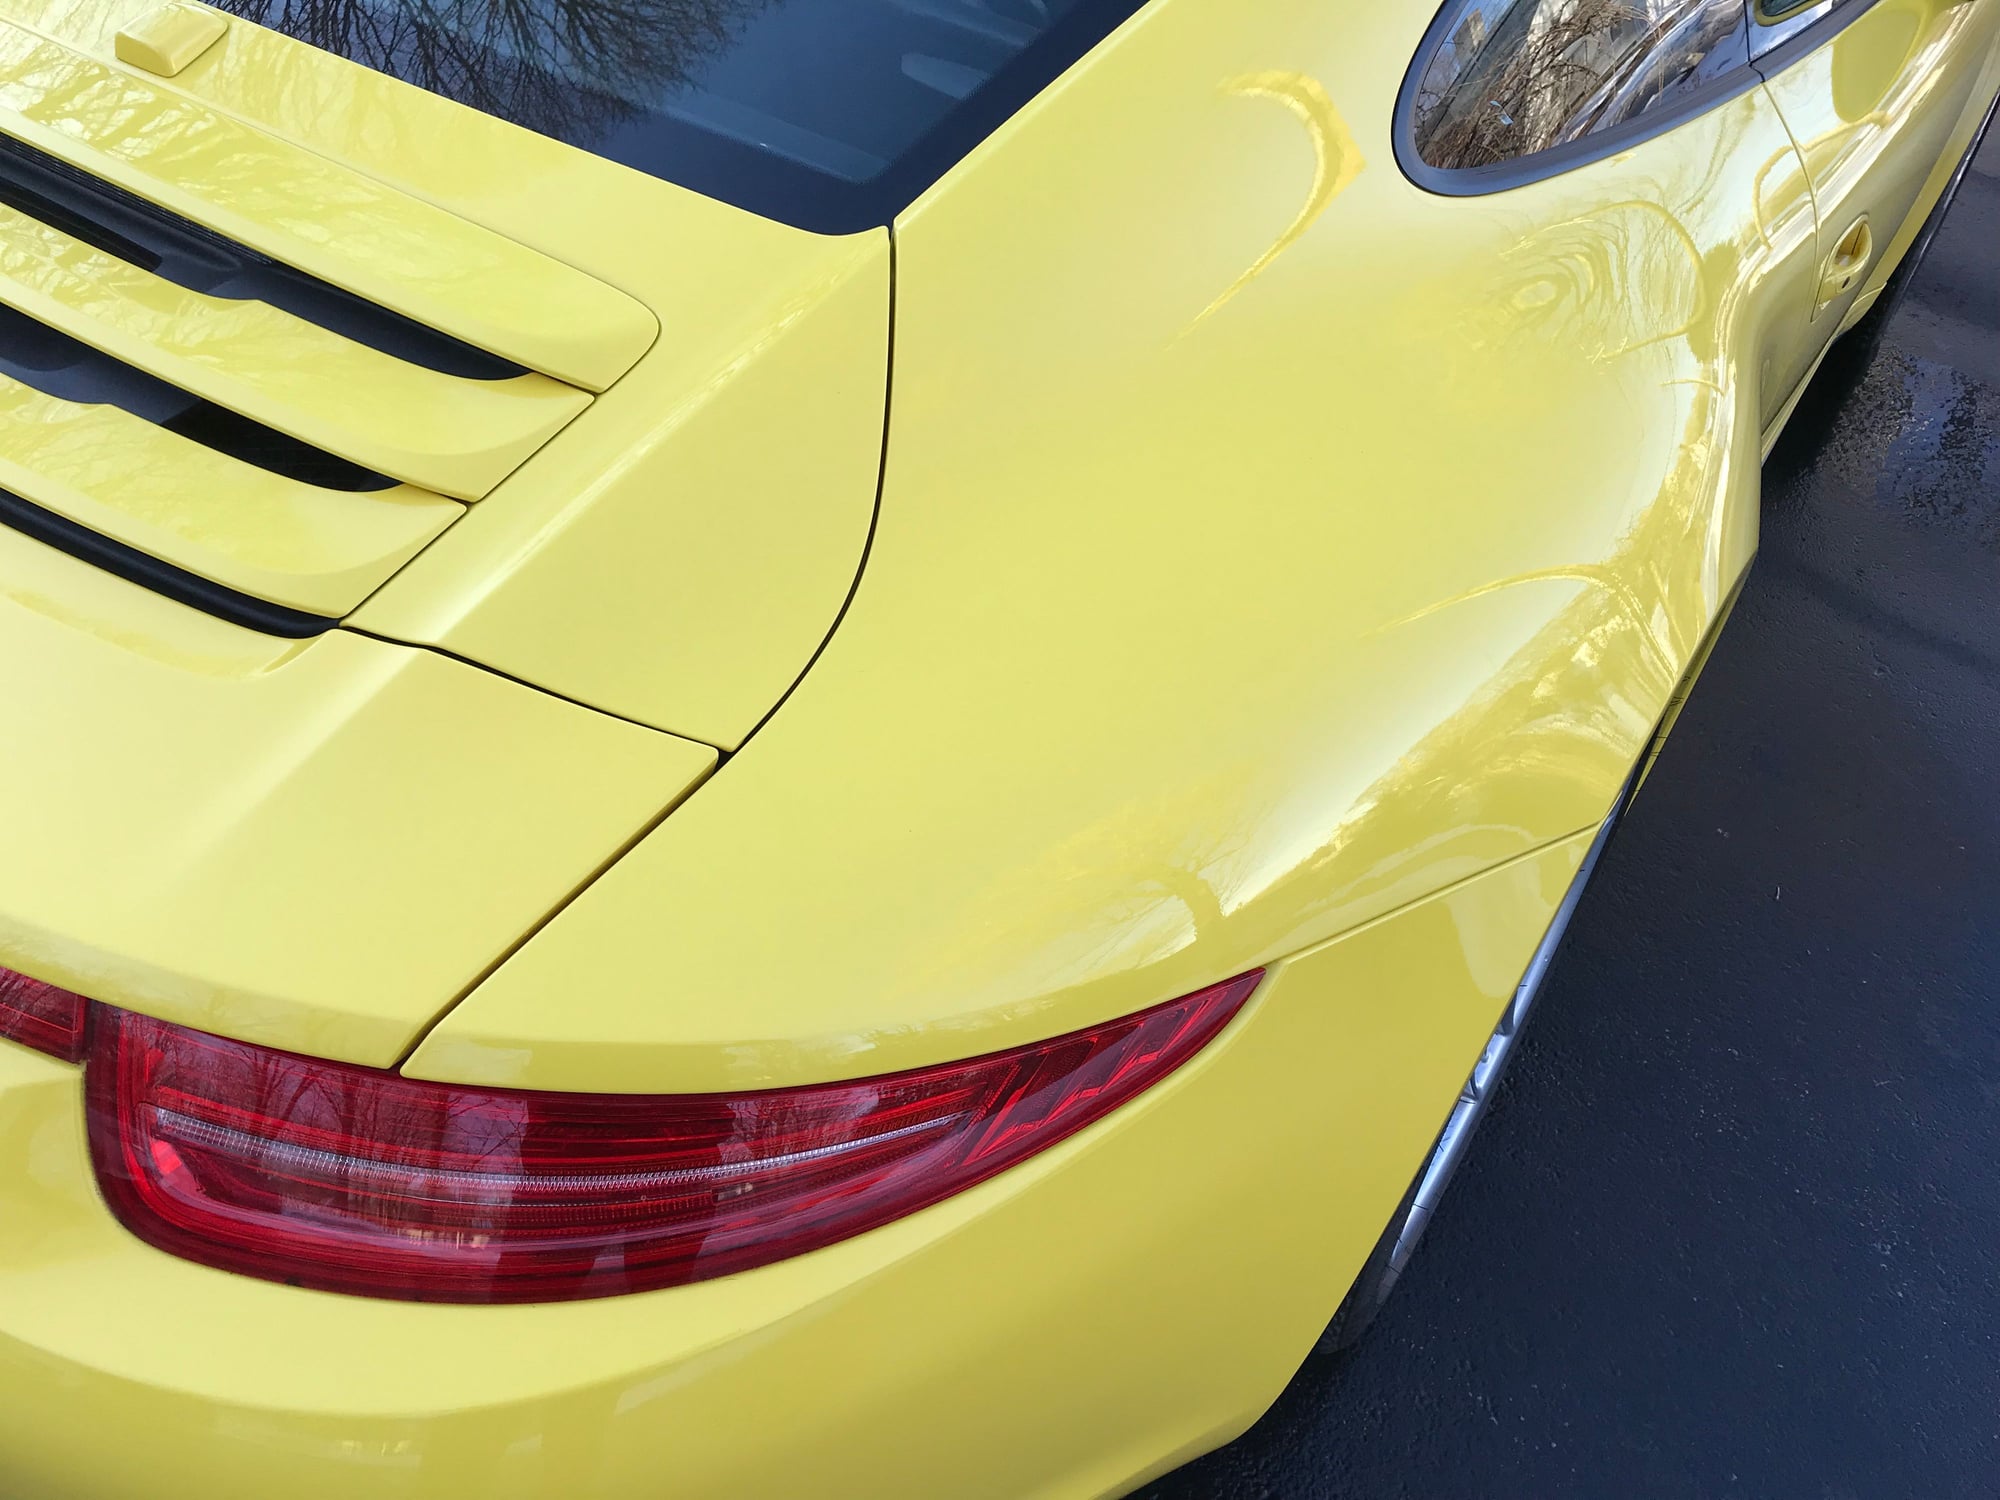 2013 Porsche 911 - 2013 Porsche 911 4S Racing Yellow - 7 Speed Manual - Used - VIN WP0AB2A90DS120897 - 18,300 Miles - 6 cyl - 4WD - Manual - Coupe - Yellow - North Hampton, NH 03862, United States